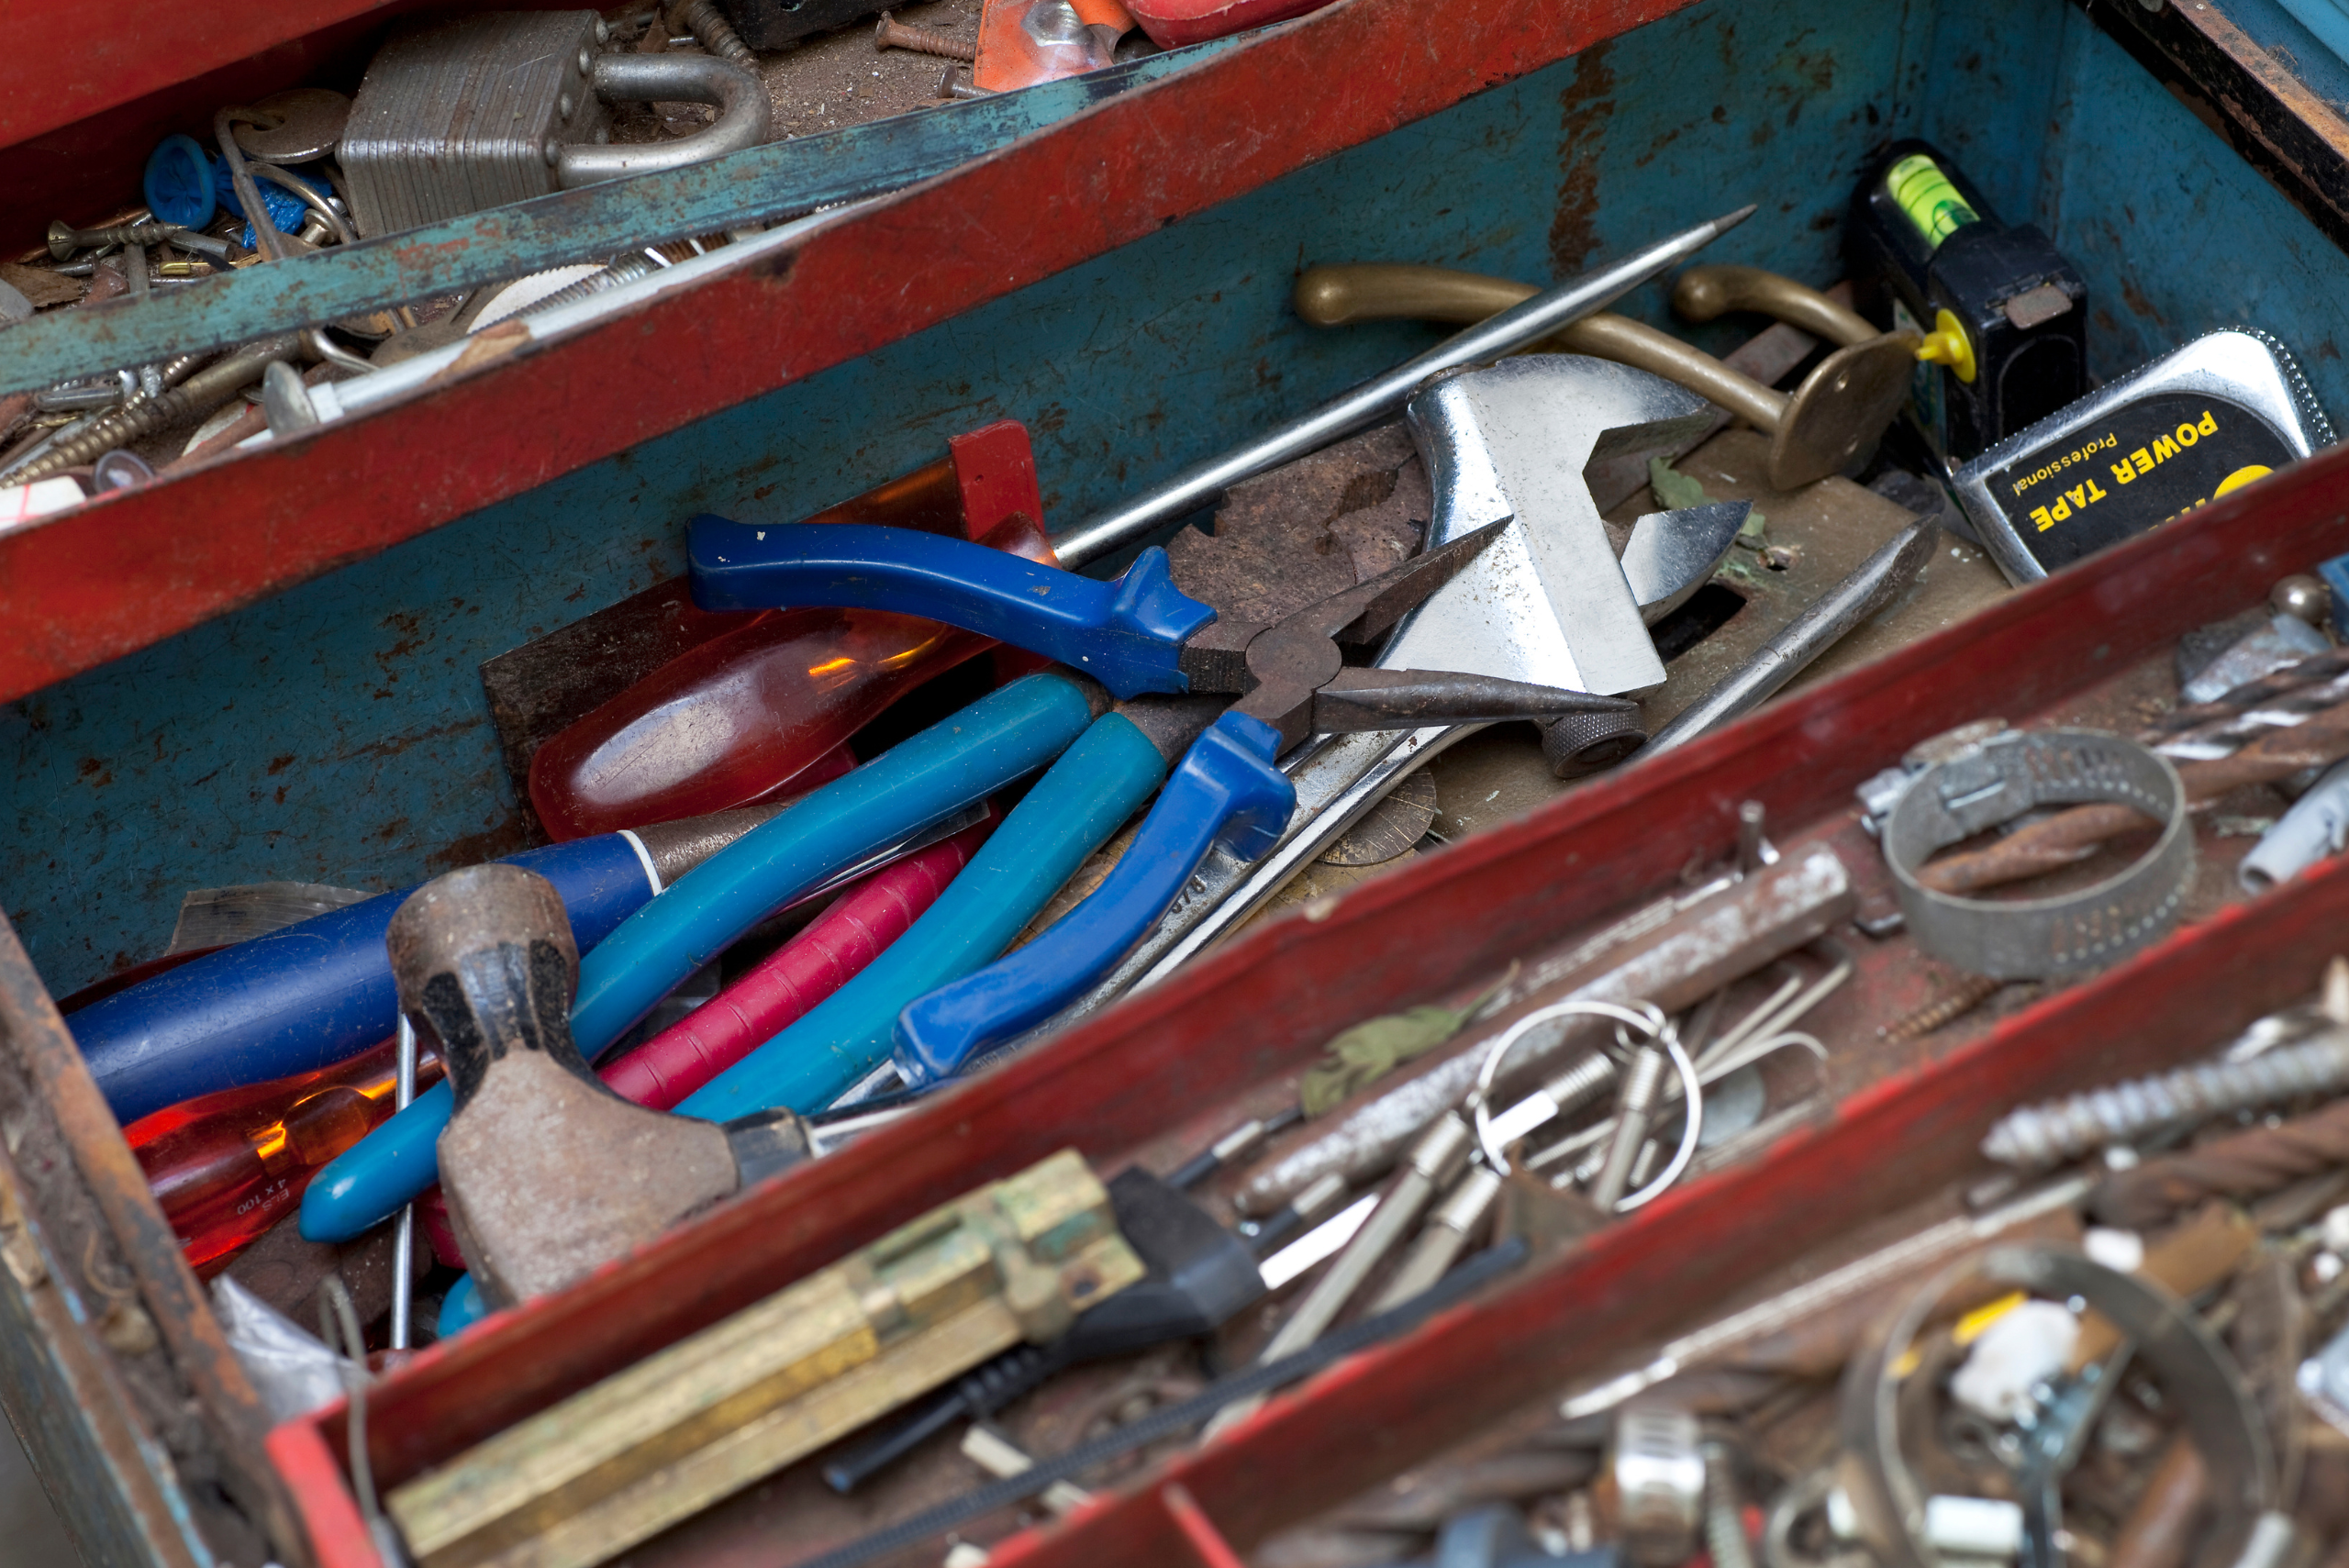 An assortment of tools and materials in toolbox.